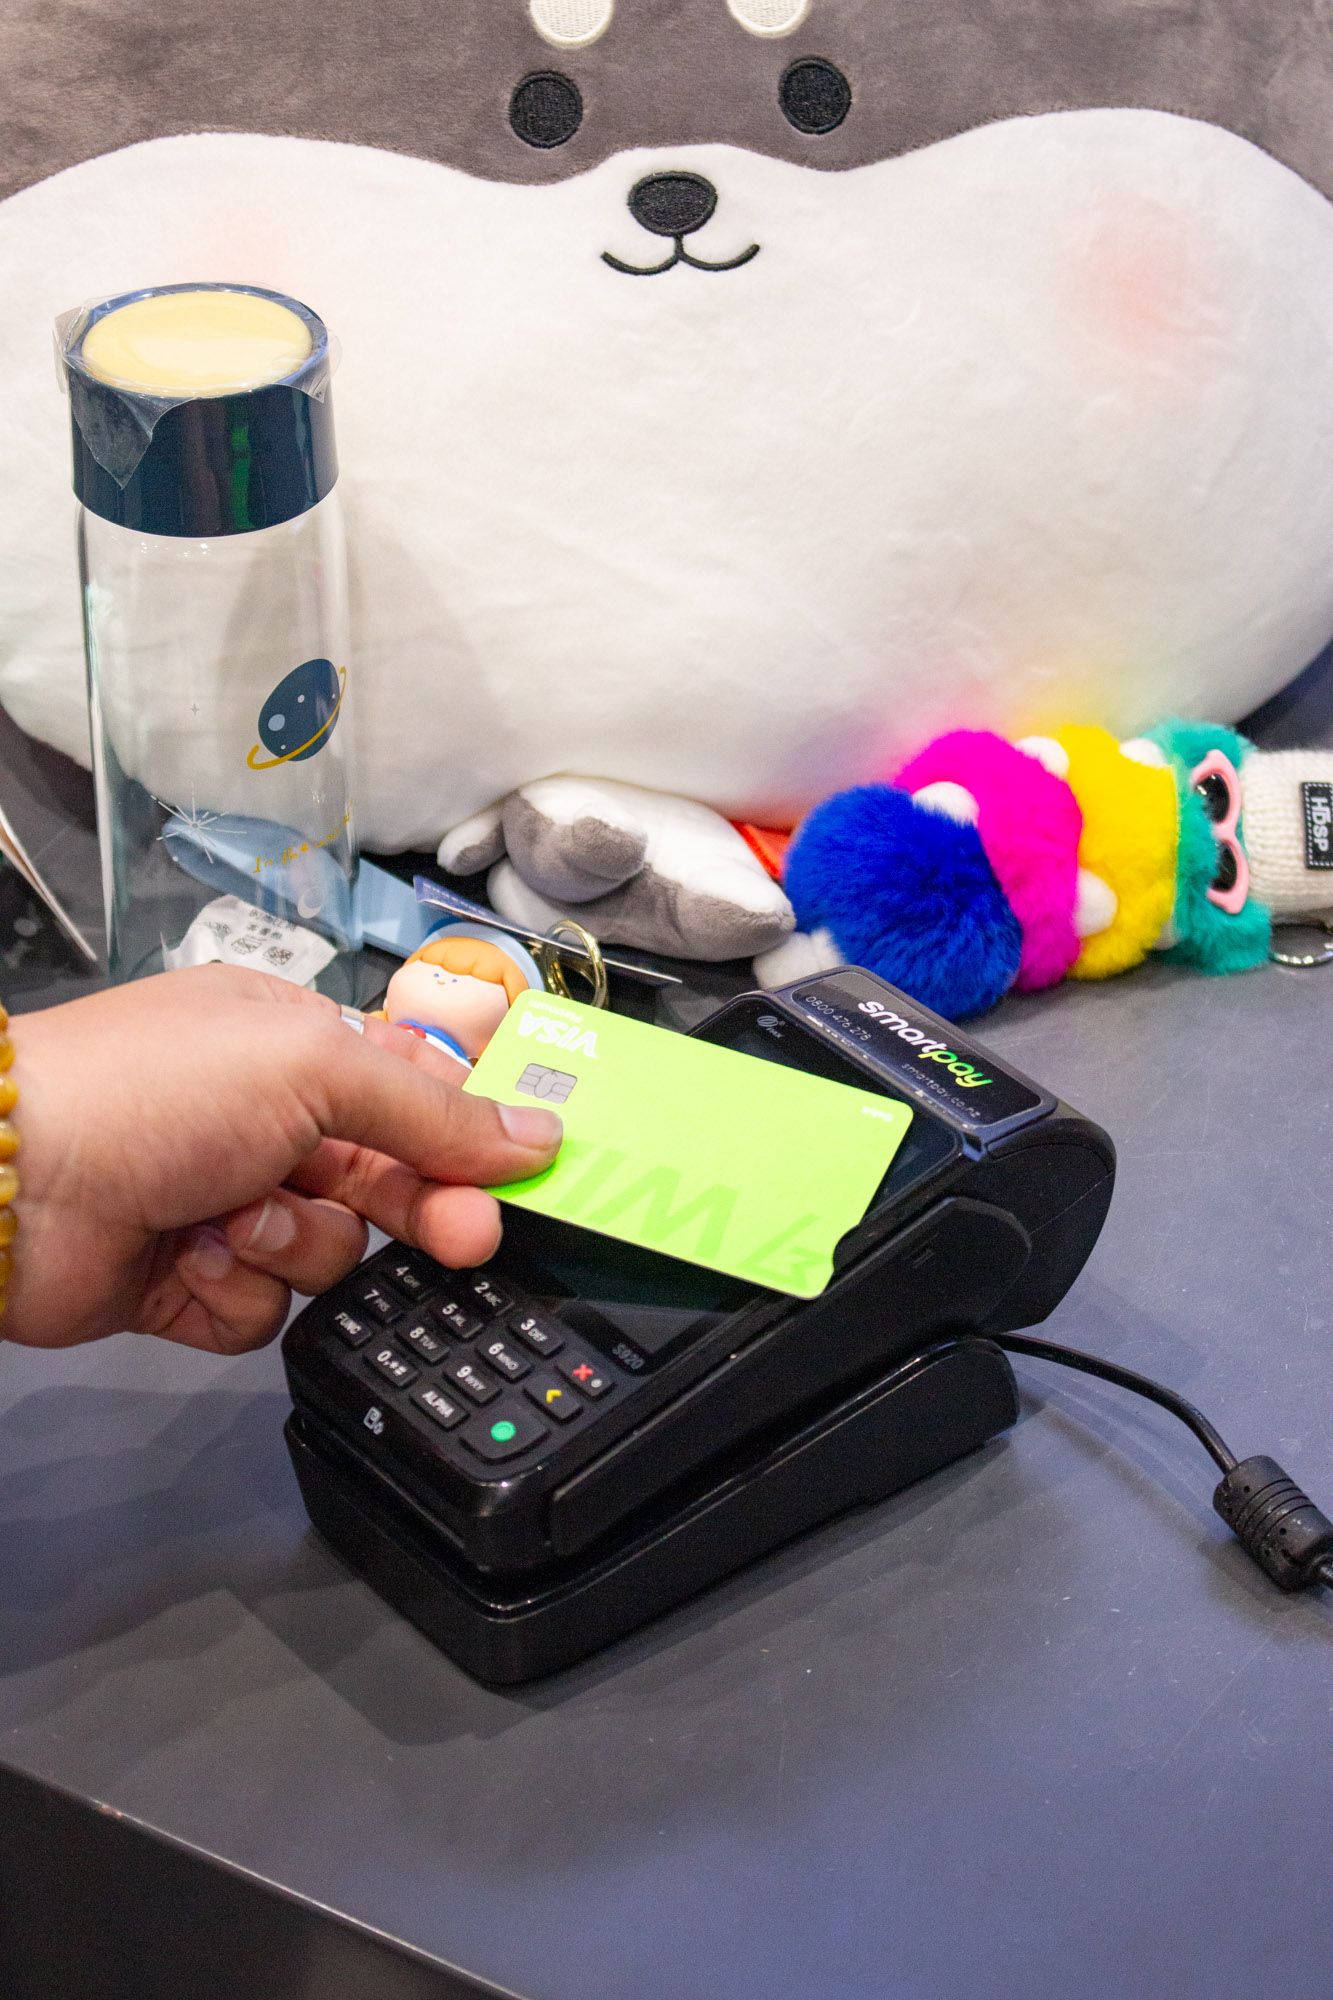 Paying with a card on a Smartpay EFTPOS terminal at YOYOSO.